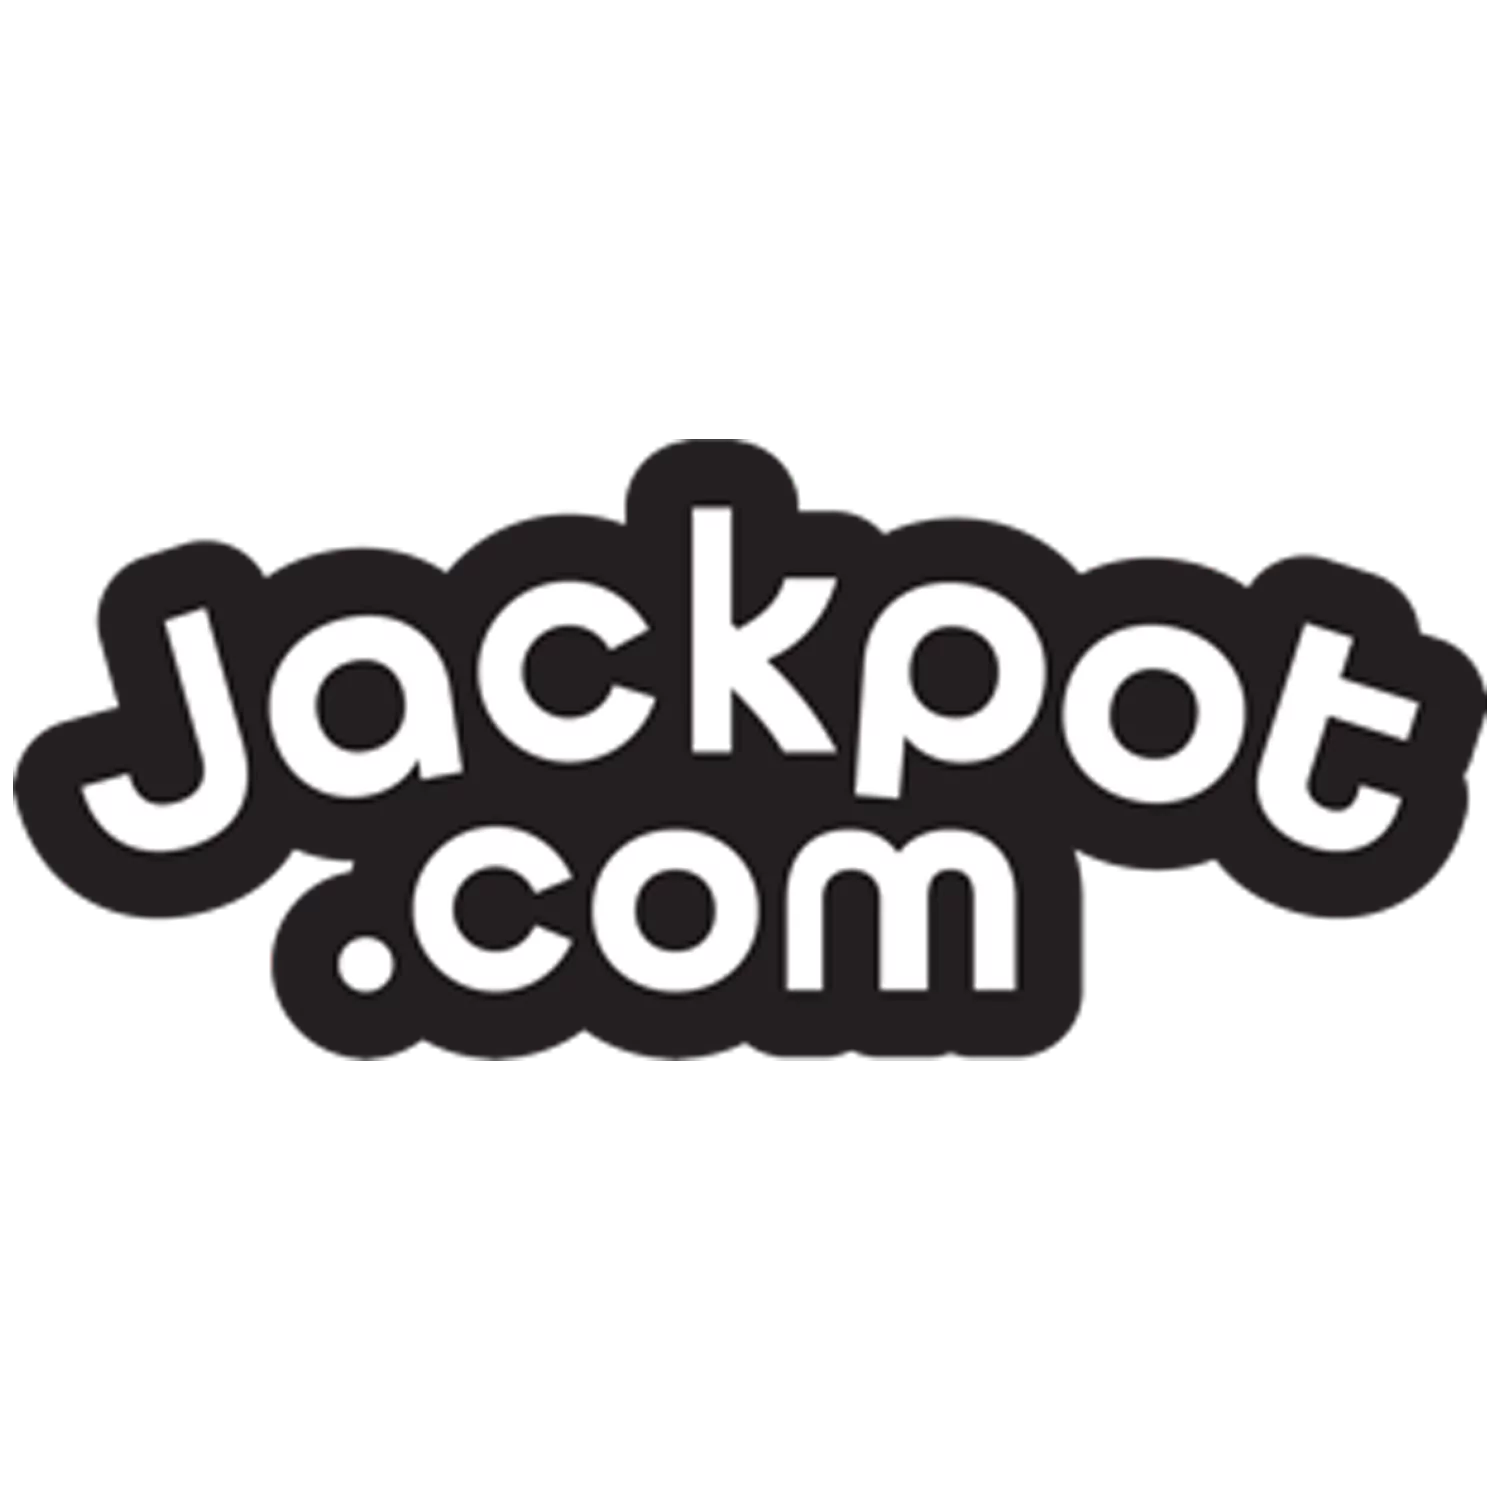 Jackpot.com offers more than 30 types of online lotteries for users from India.